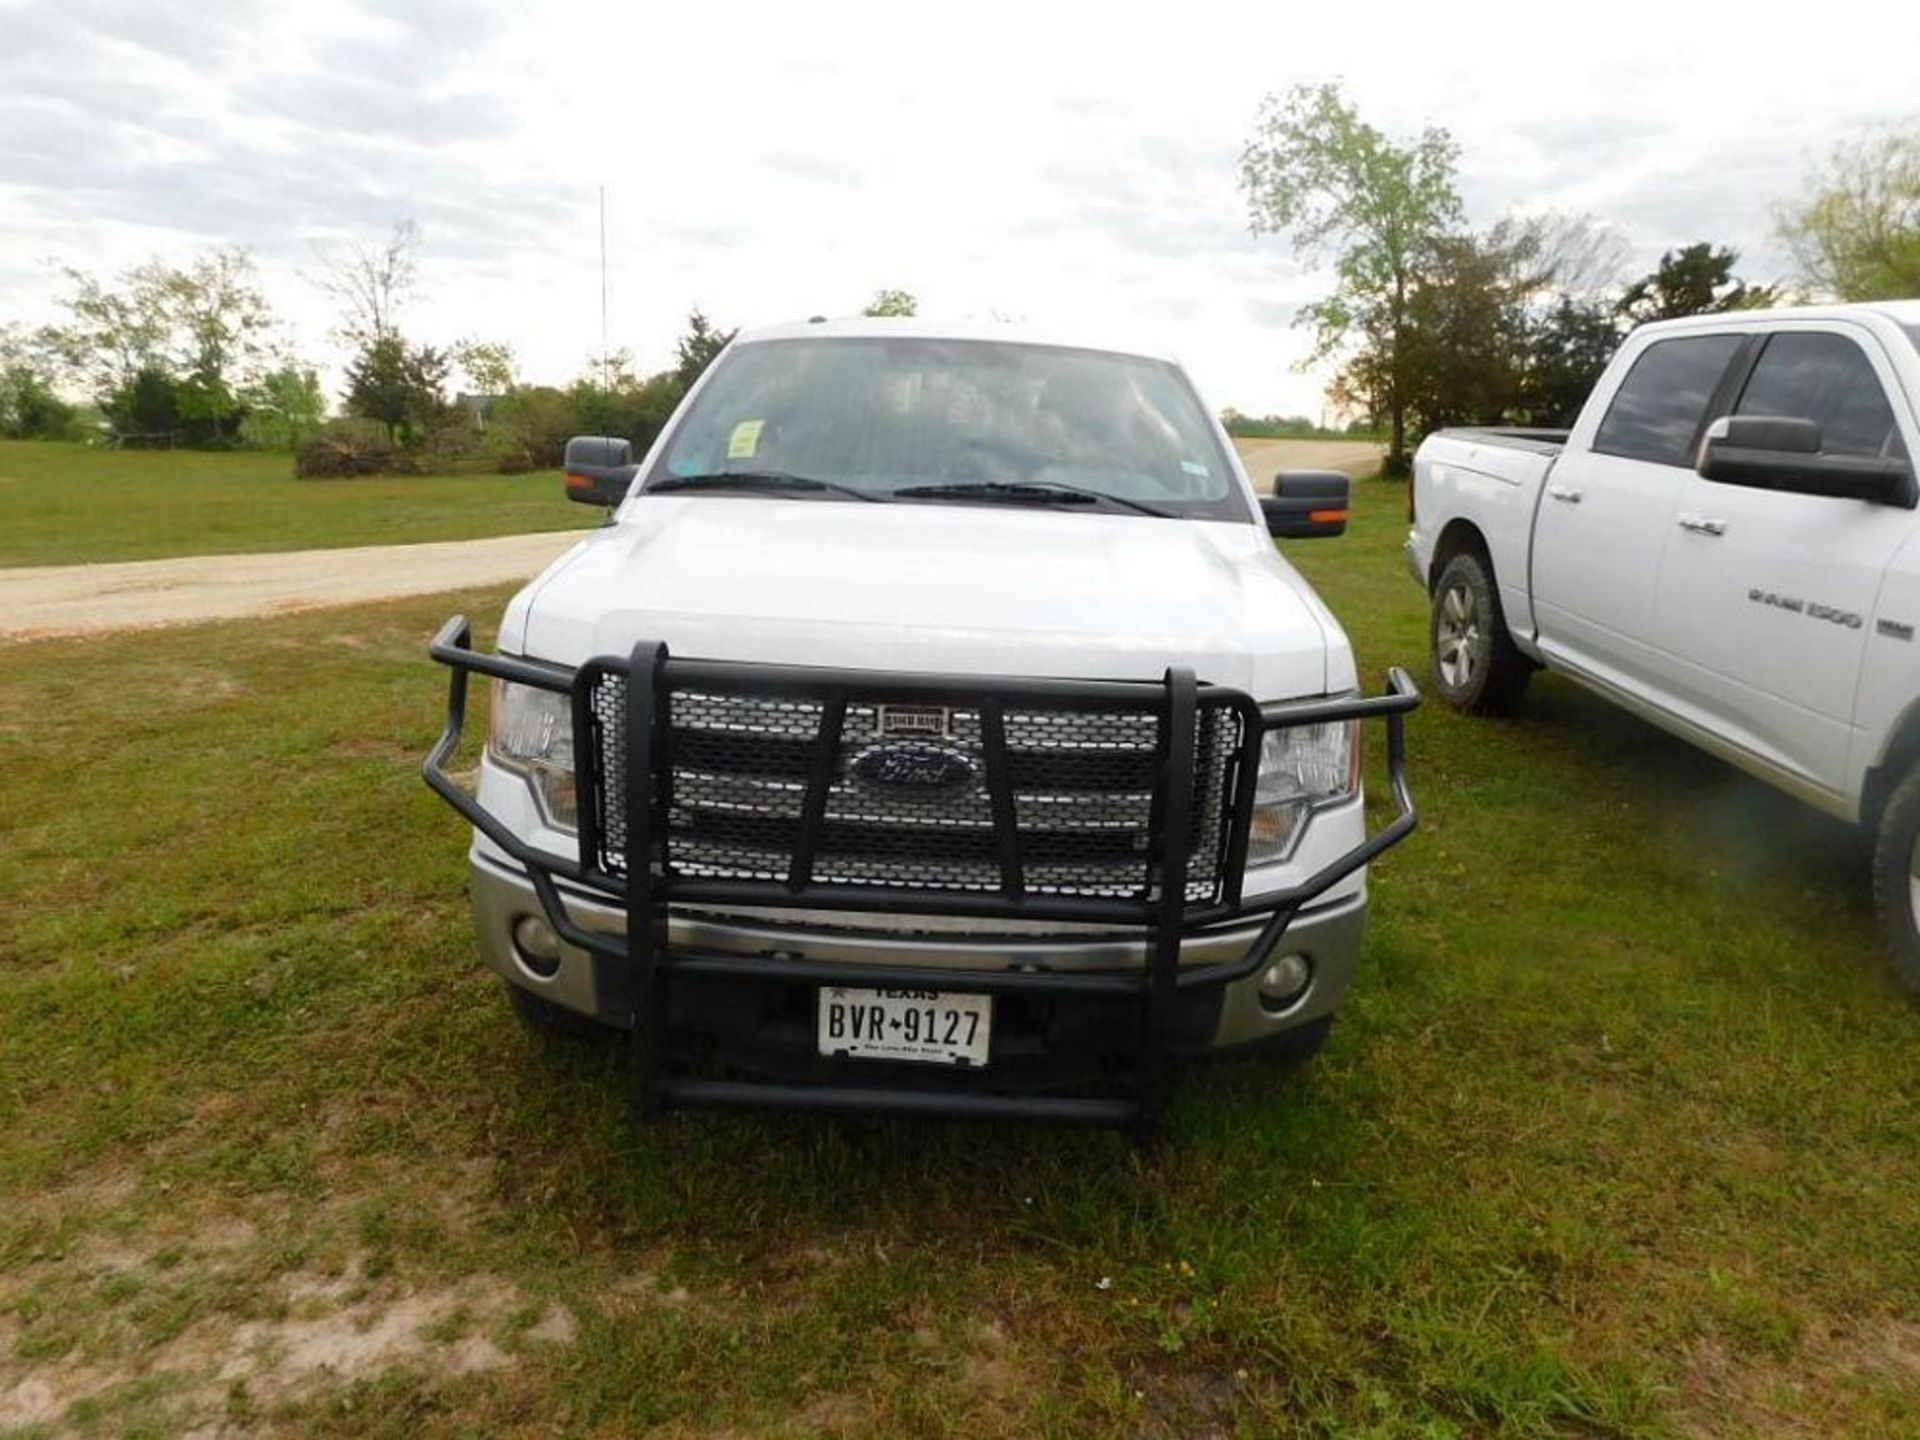 2013 Ford F-150 XLT 4x4 Crew Cab Pick-up Truck, VIN 1FTFW1EF4DFB20236, 5-1/2 ft. Bed, 5.0 Liter Gaso - Image 3 of 4